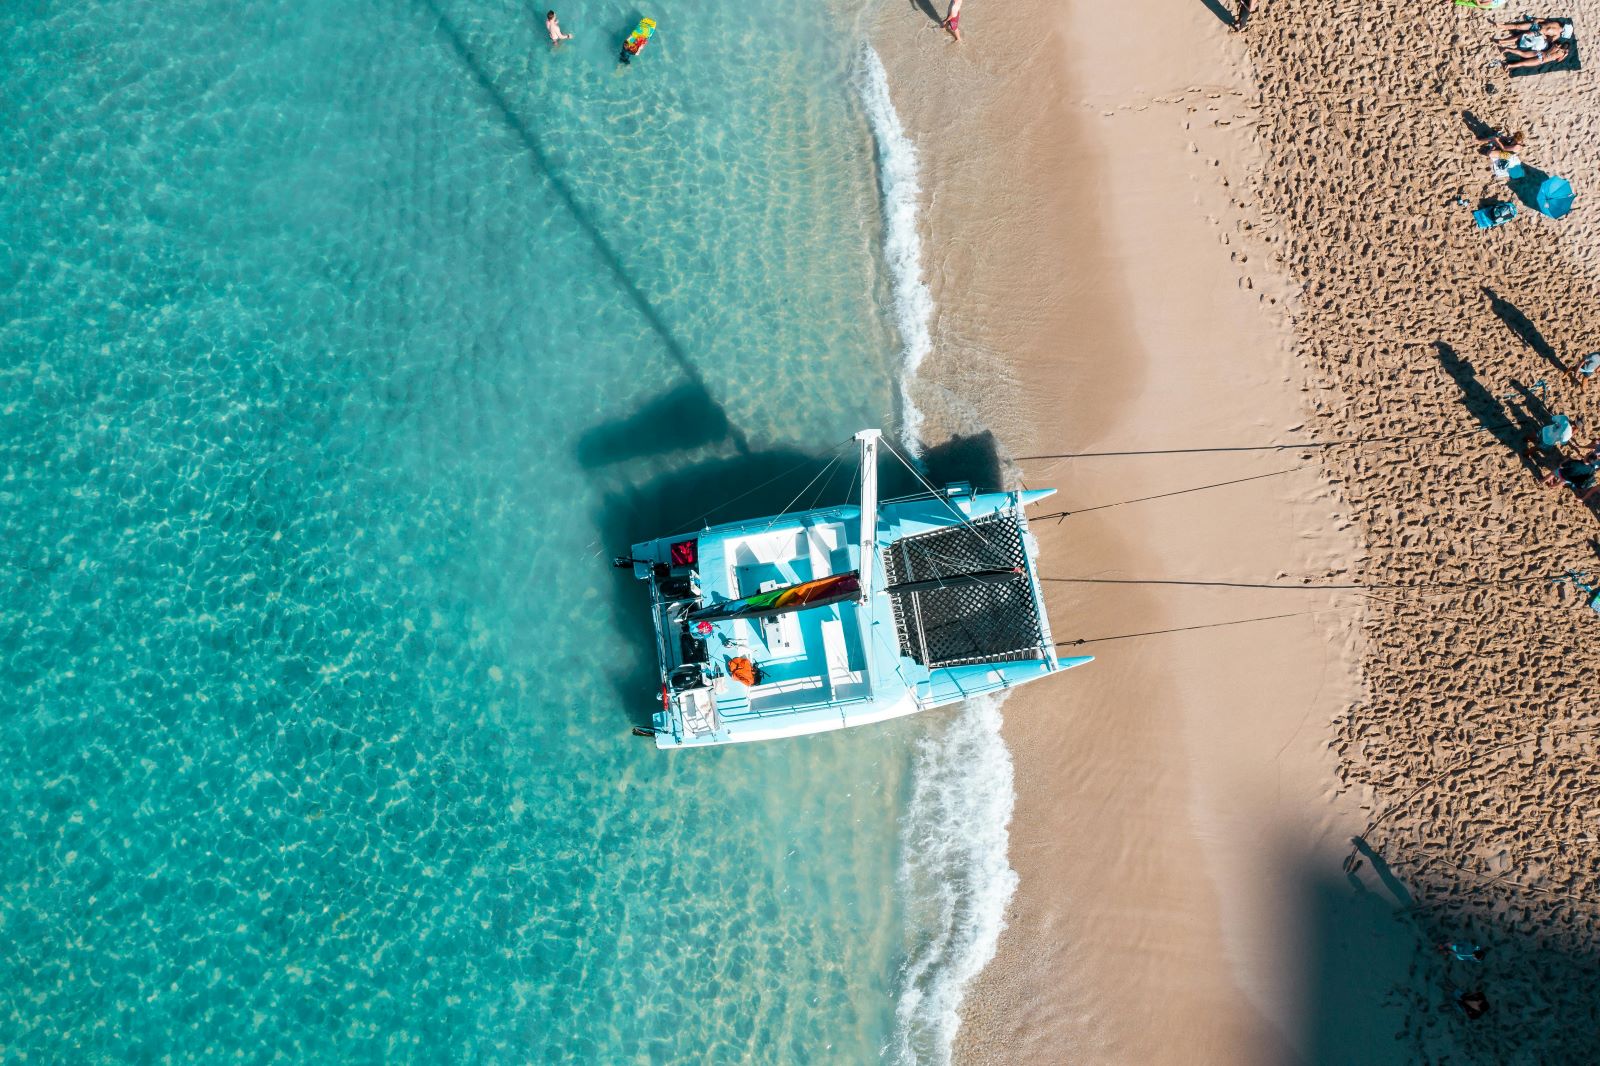 <p class="wp-caption-text">Image Credit: Pexels / Jess Loiterton</p>  <p>Rent a luxury catamaran for the day. You don’t need a destination when you have champagne and the Atlantic.</p>